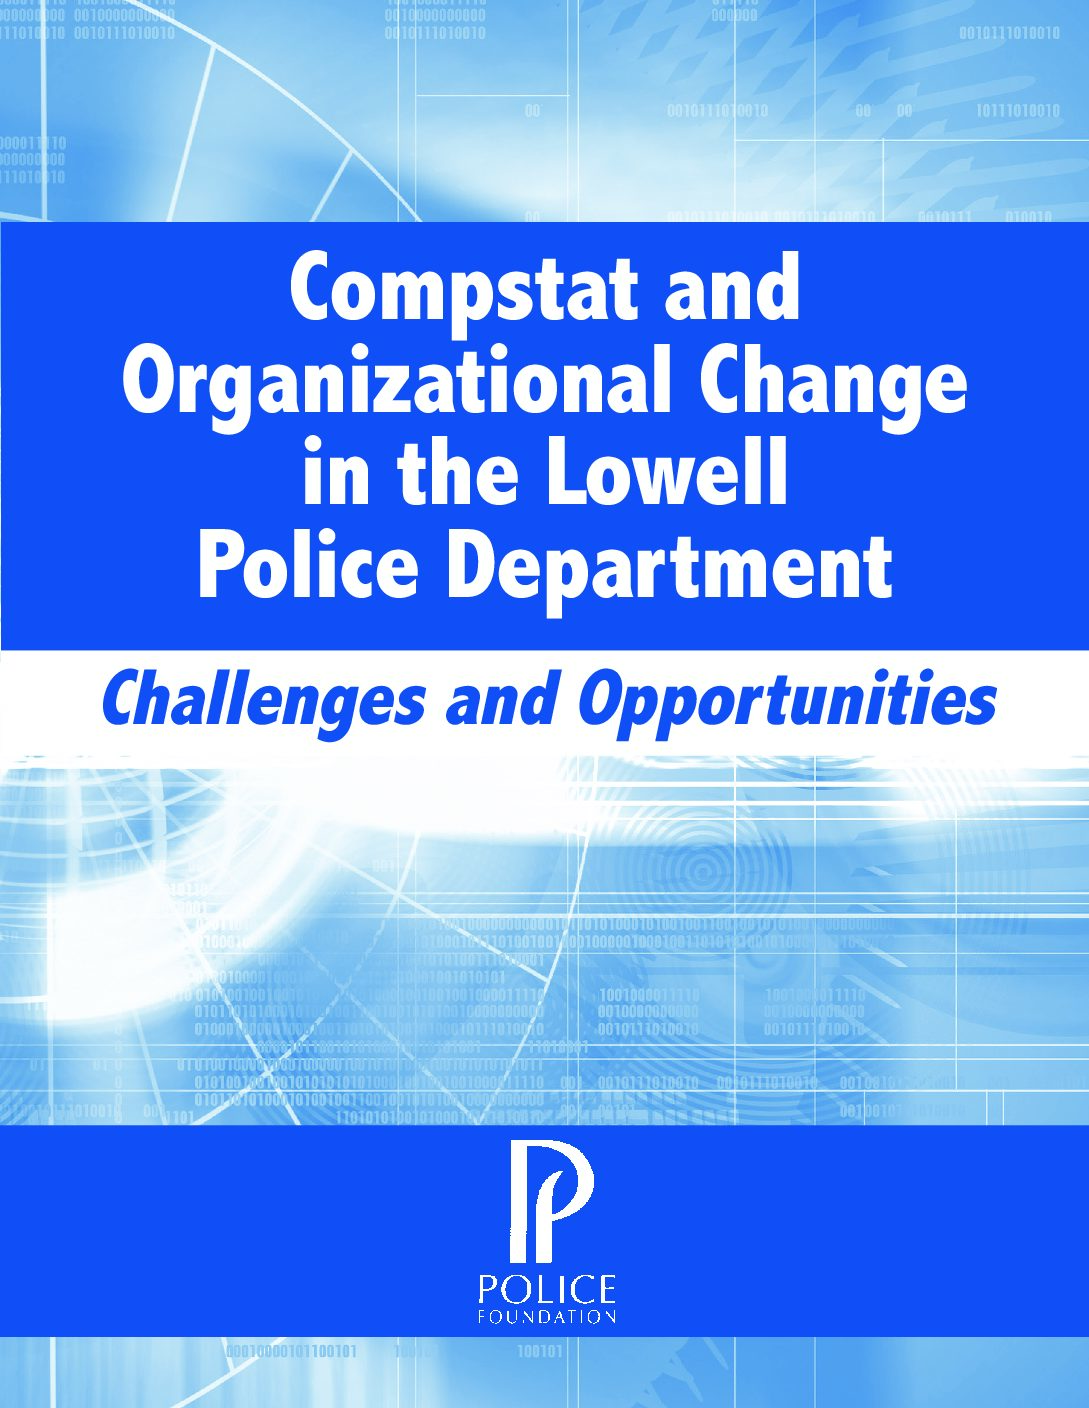 Willis-et-al.-2004-Compstat-and-Organizational-Change-in-the-Lowell-Police-Department-pdf